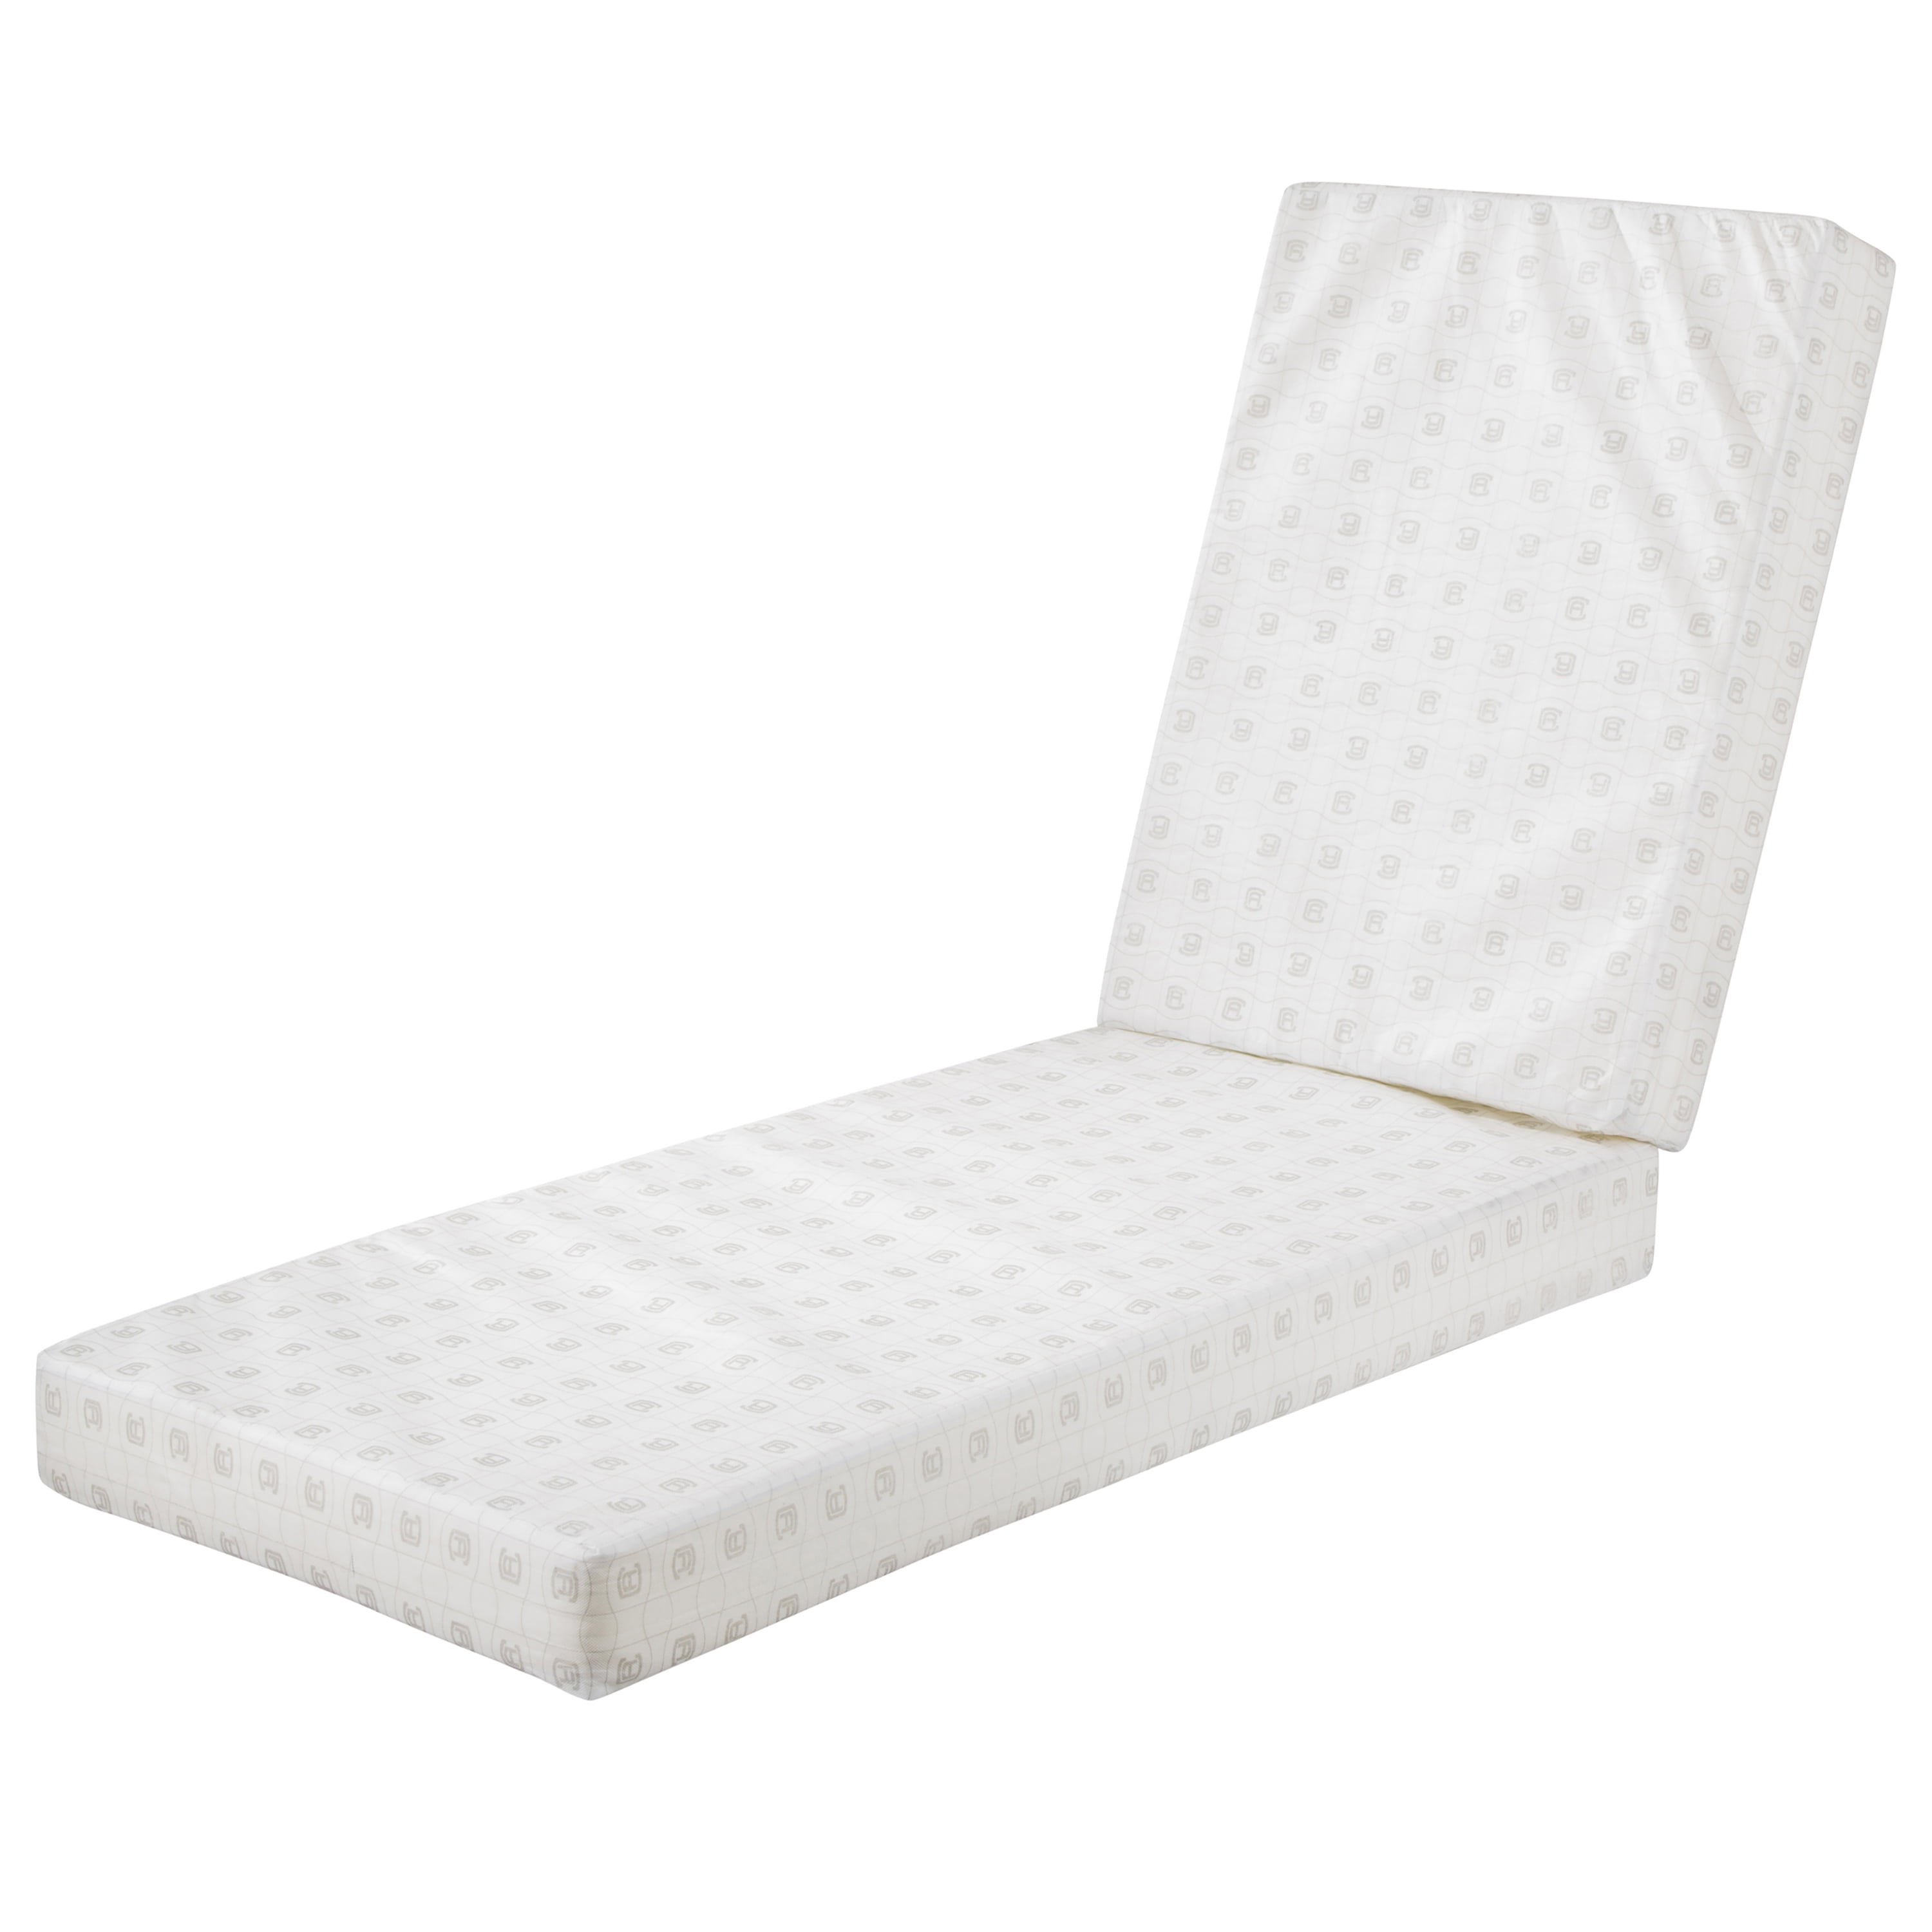 Classic Accessories Montlake Water-Resistant 74 x 23 x 3 Inch Patio Chaise Slip